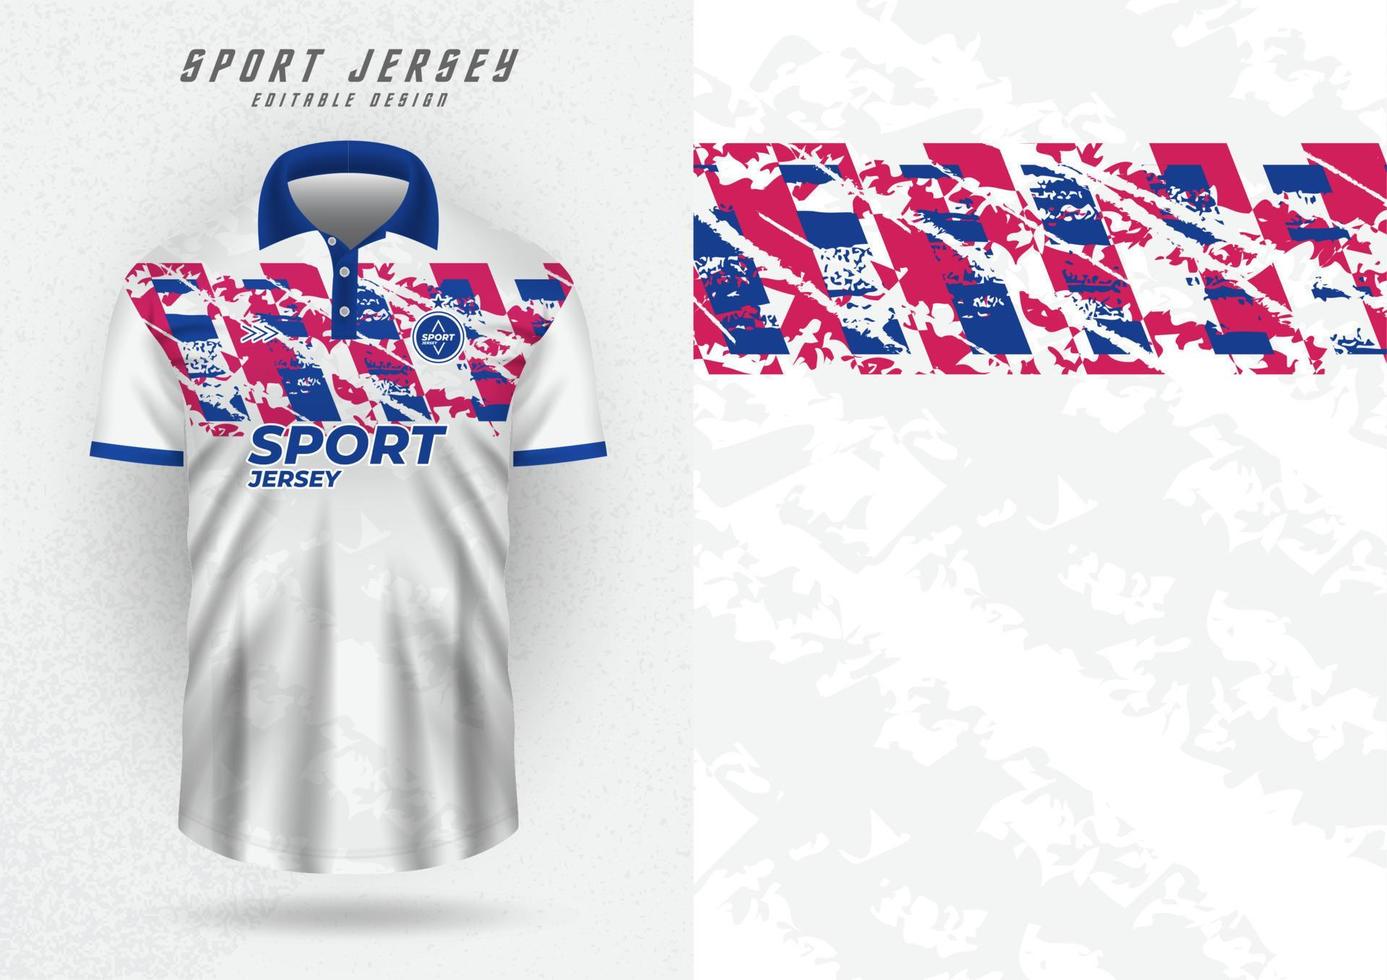 mockup background for sports jersey soccer running racing white stripes grunge vector